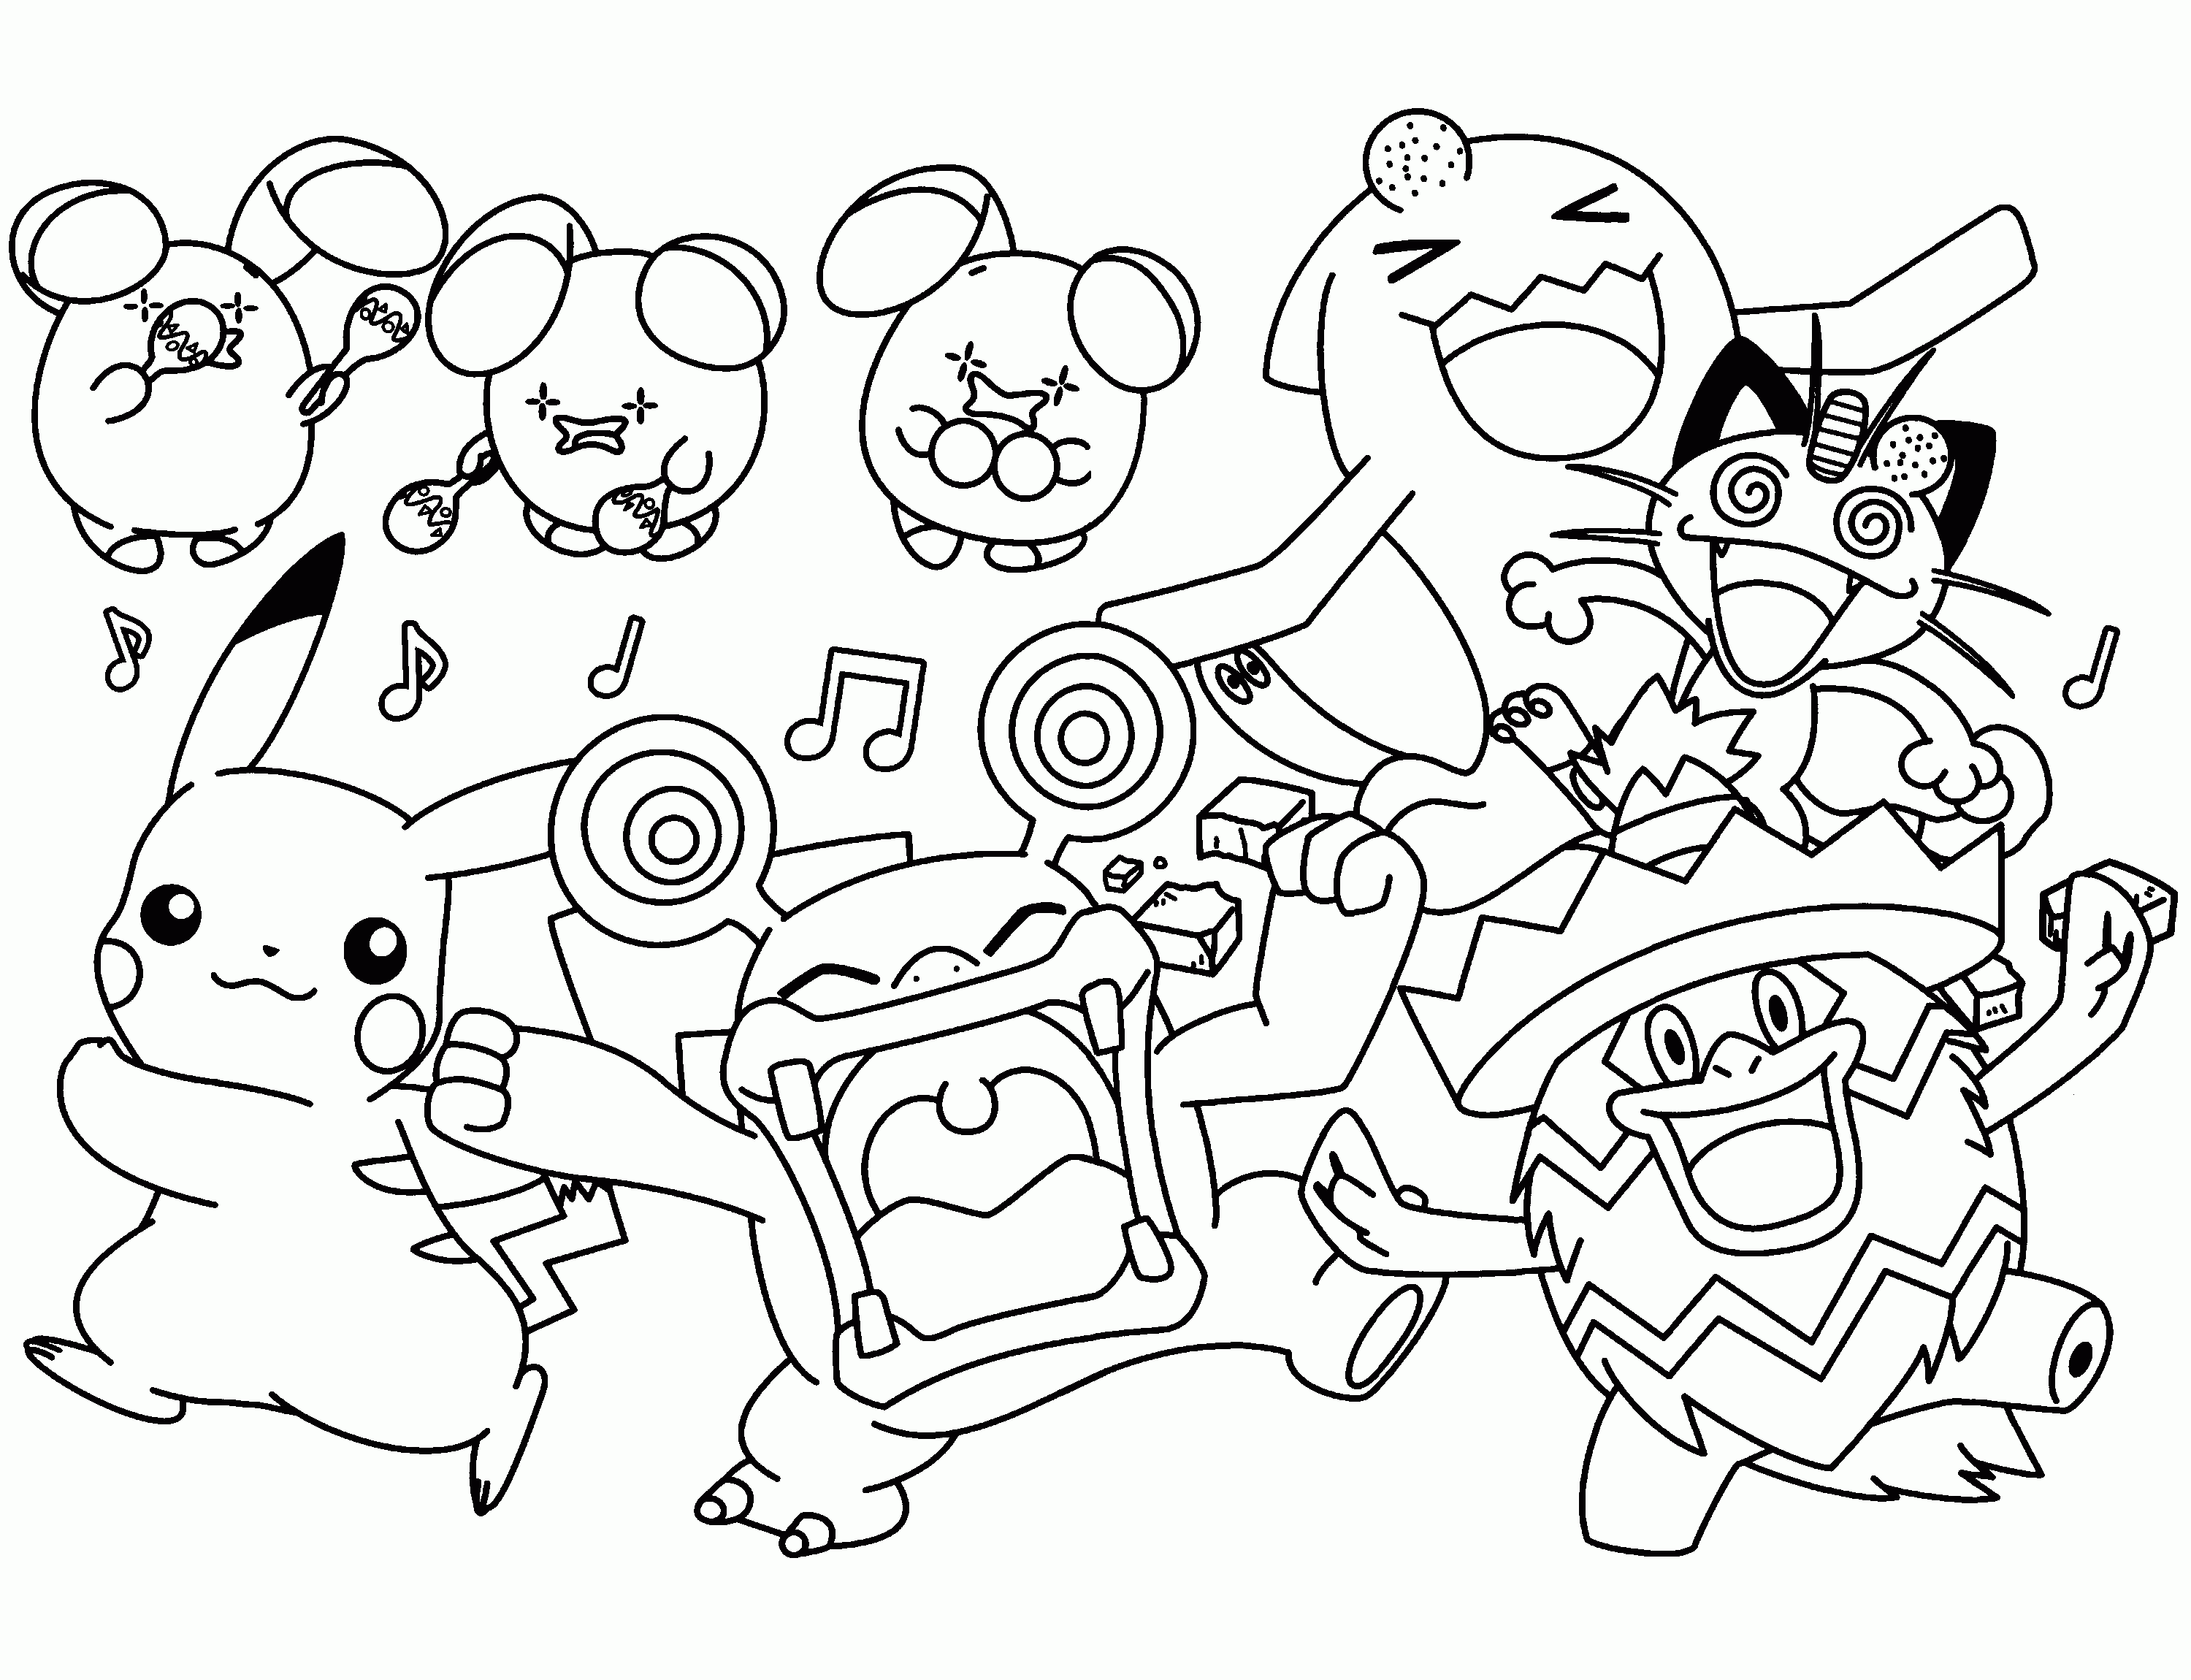 Pokemon coloring page to download